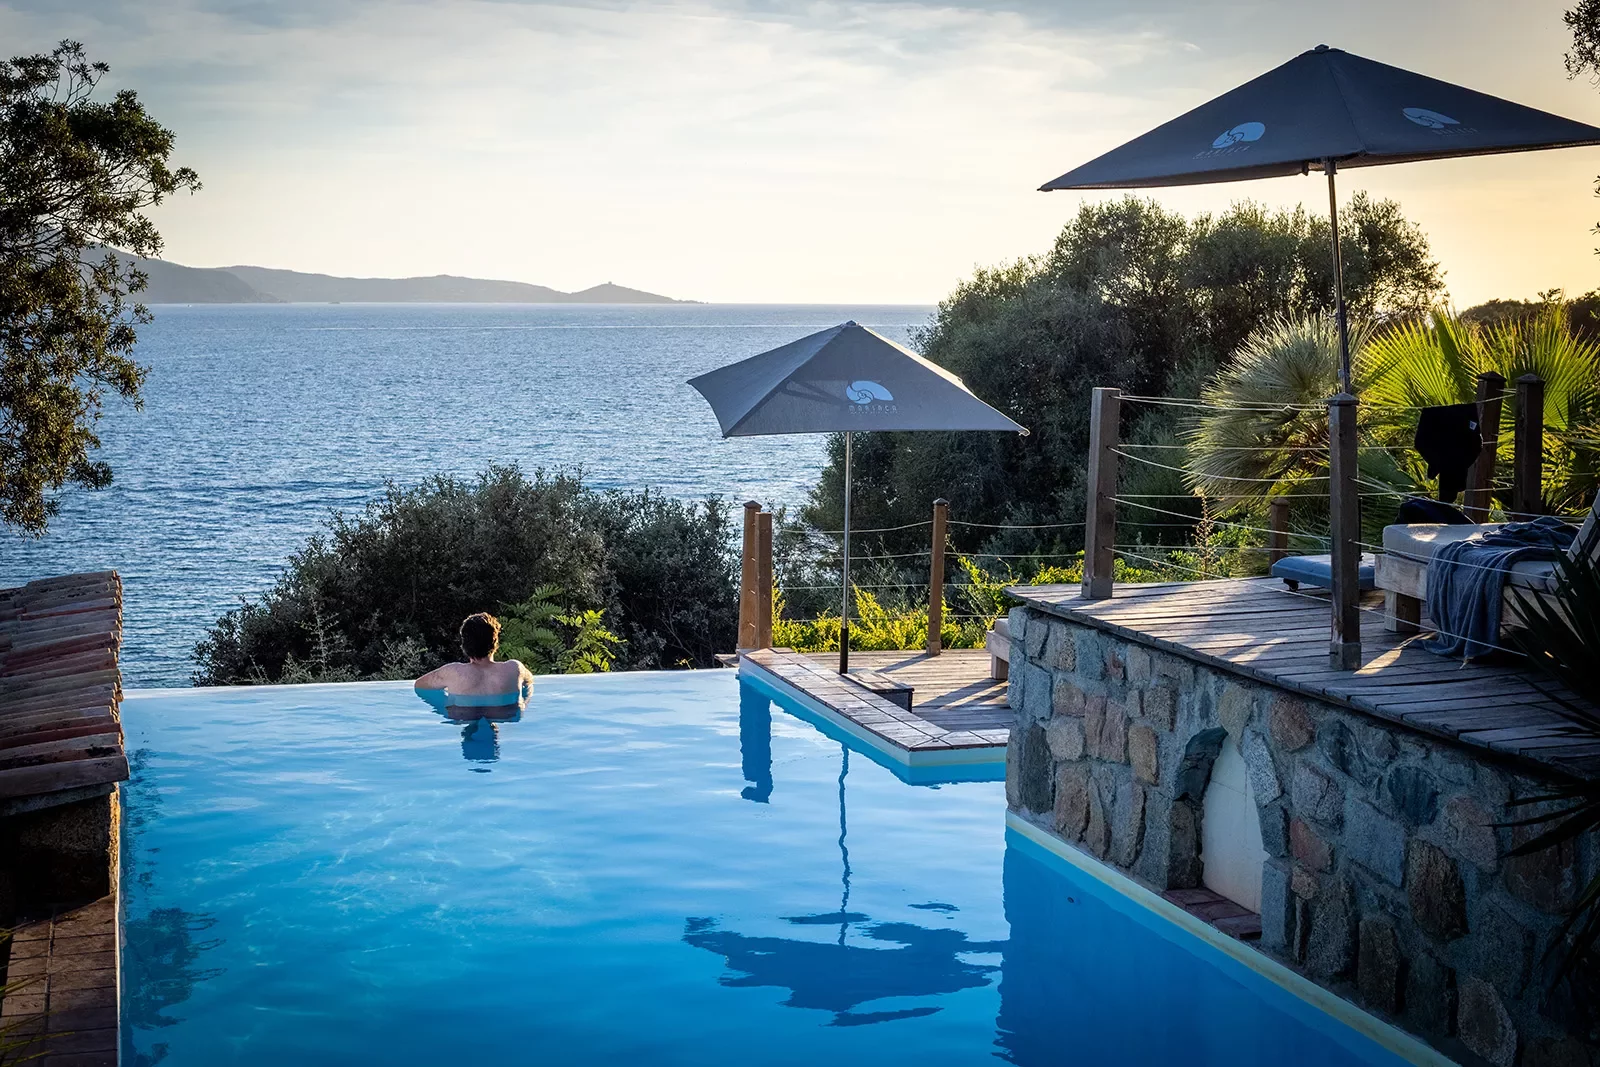 Guest relaxing in a pool, overlooking ocean and distant hills.